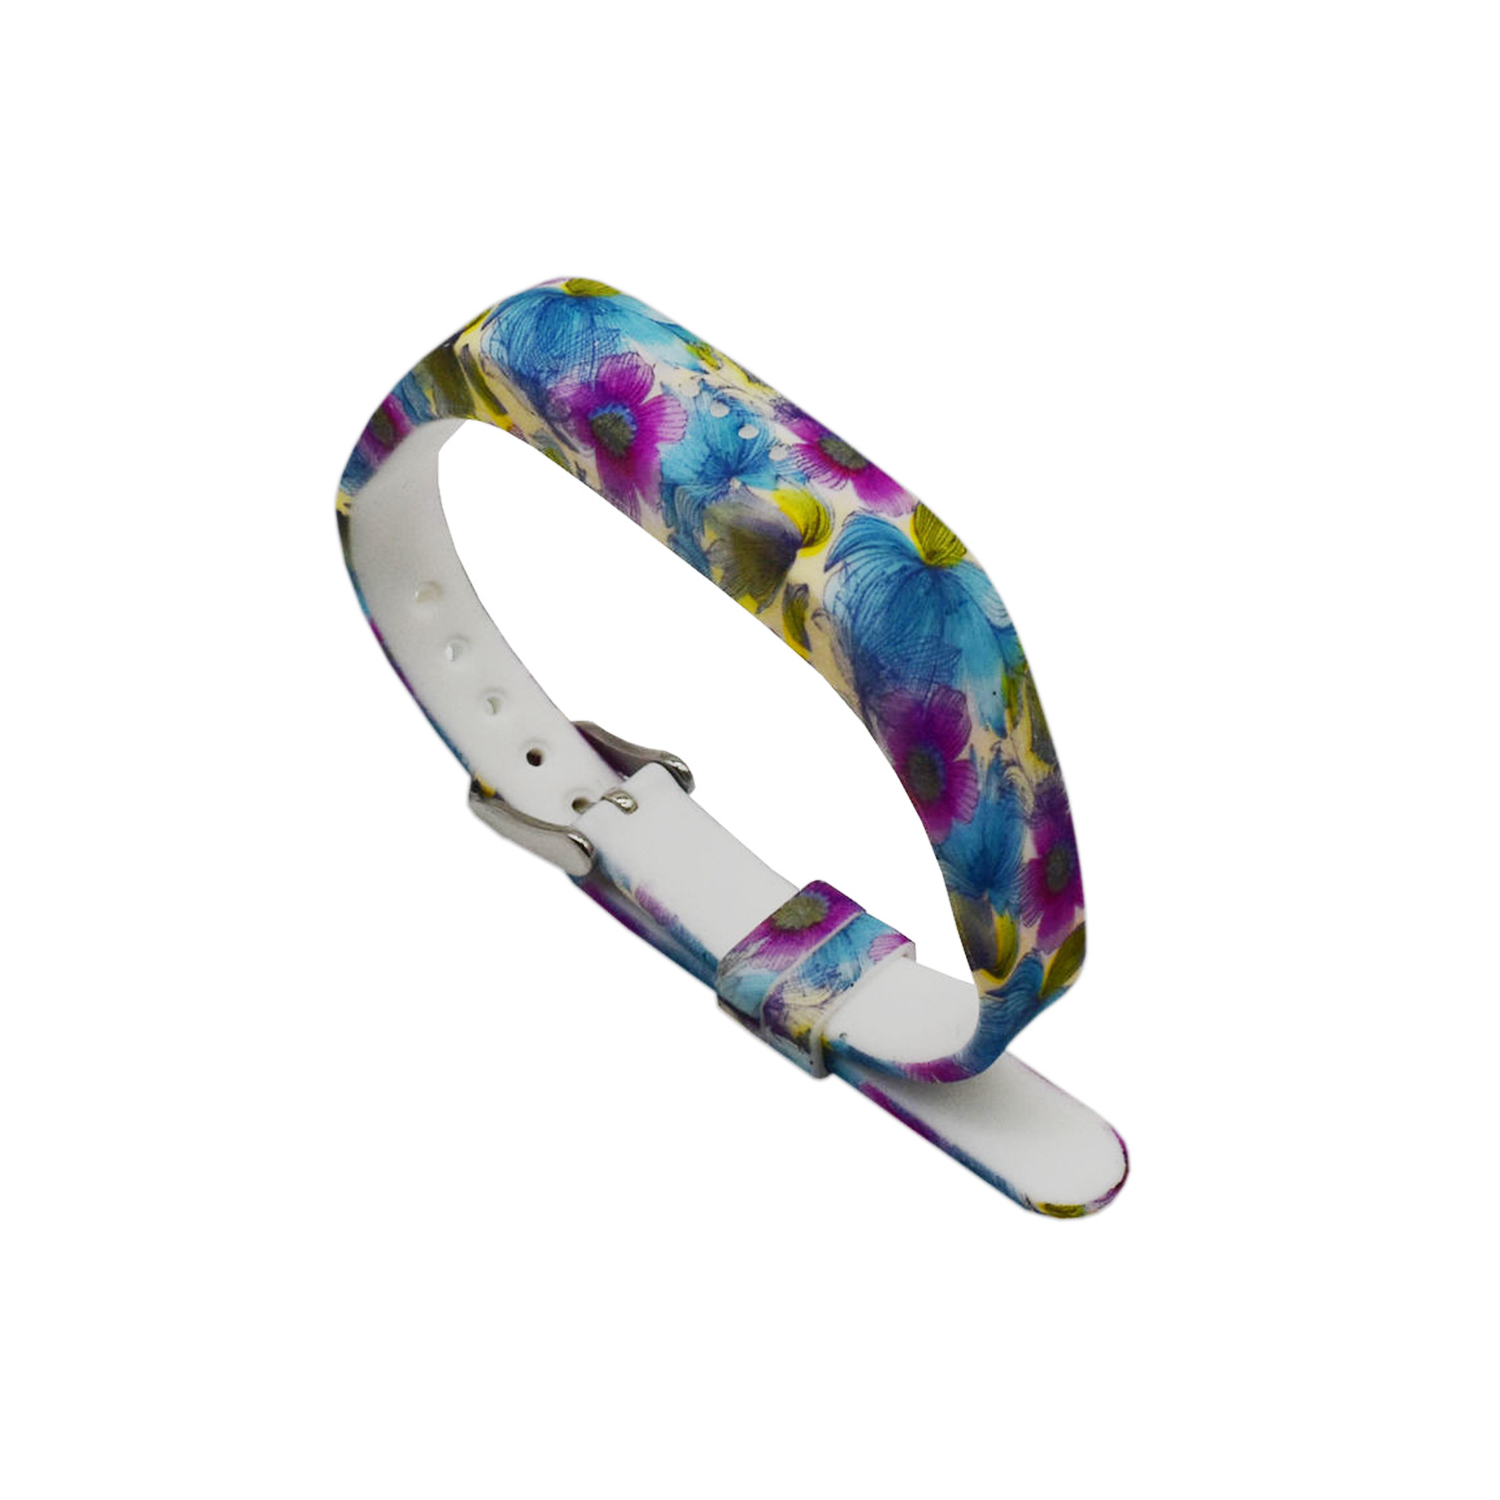 Fitbit Silicone Strap for Flex 2 in Wild Flowers Blue and Purple Pattern